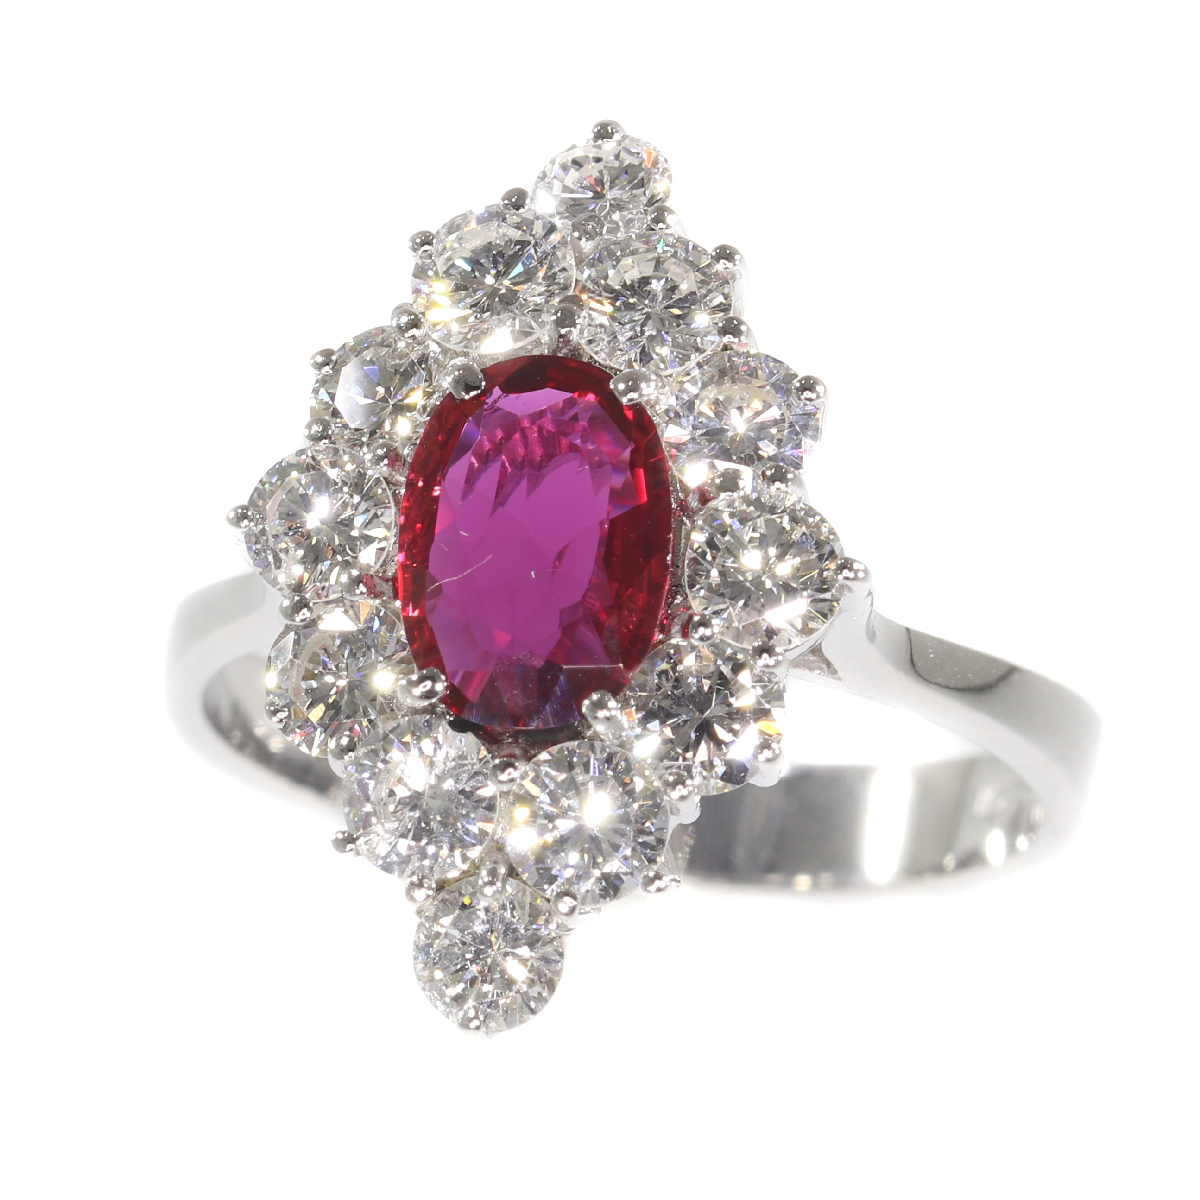 Vintage 1970's ring with beautiful ruby and set with 12 brilliant cut diamonds